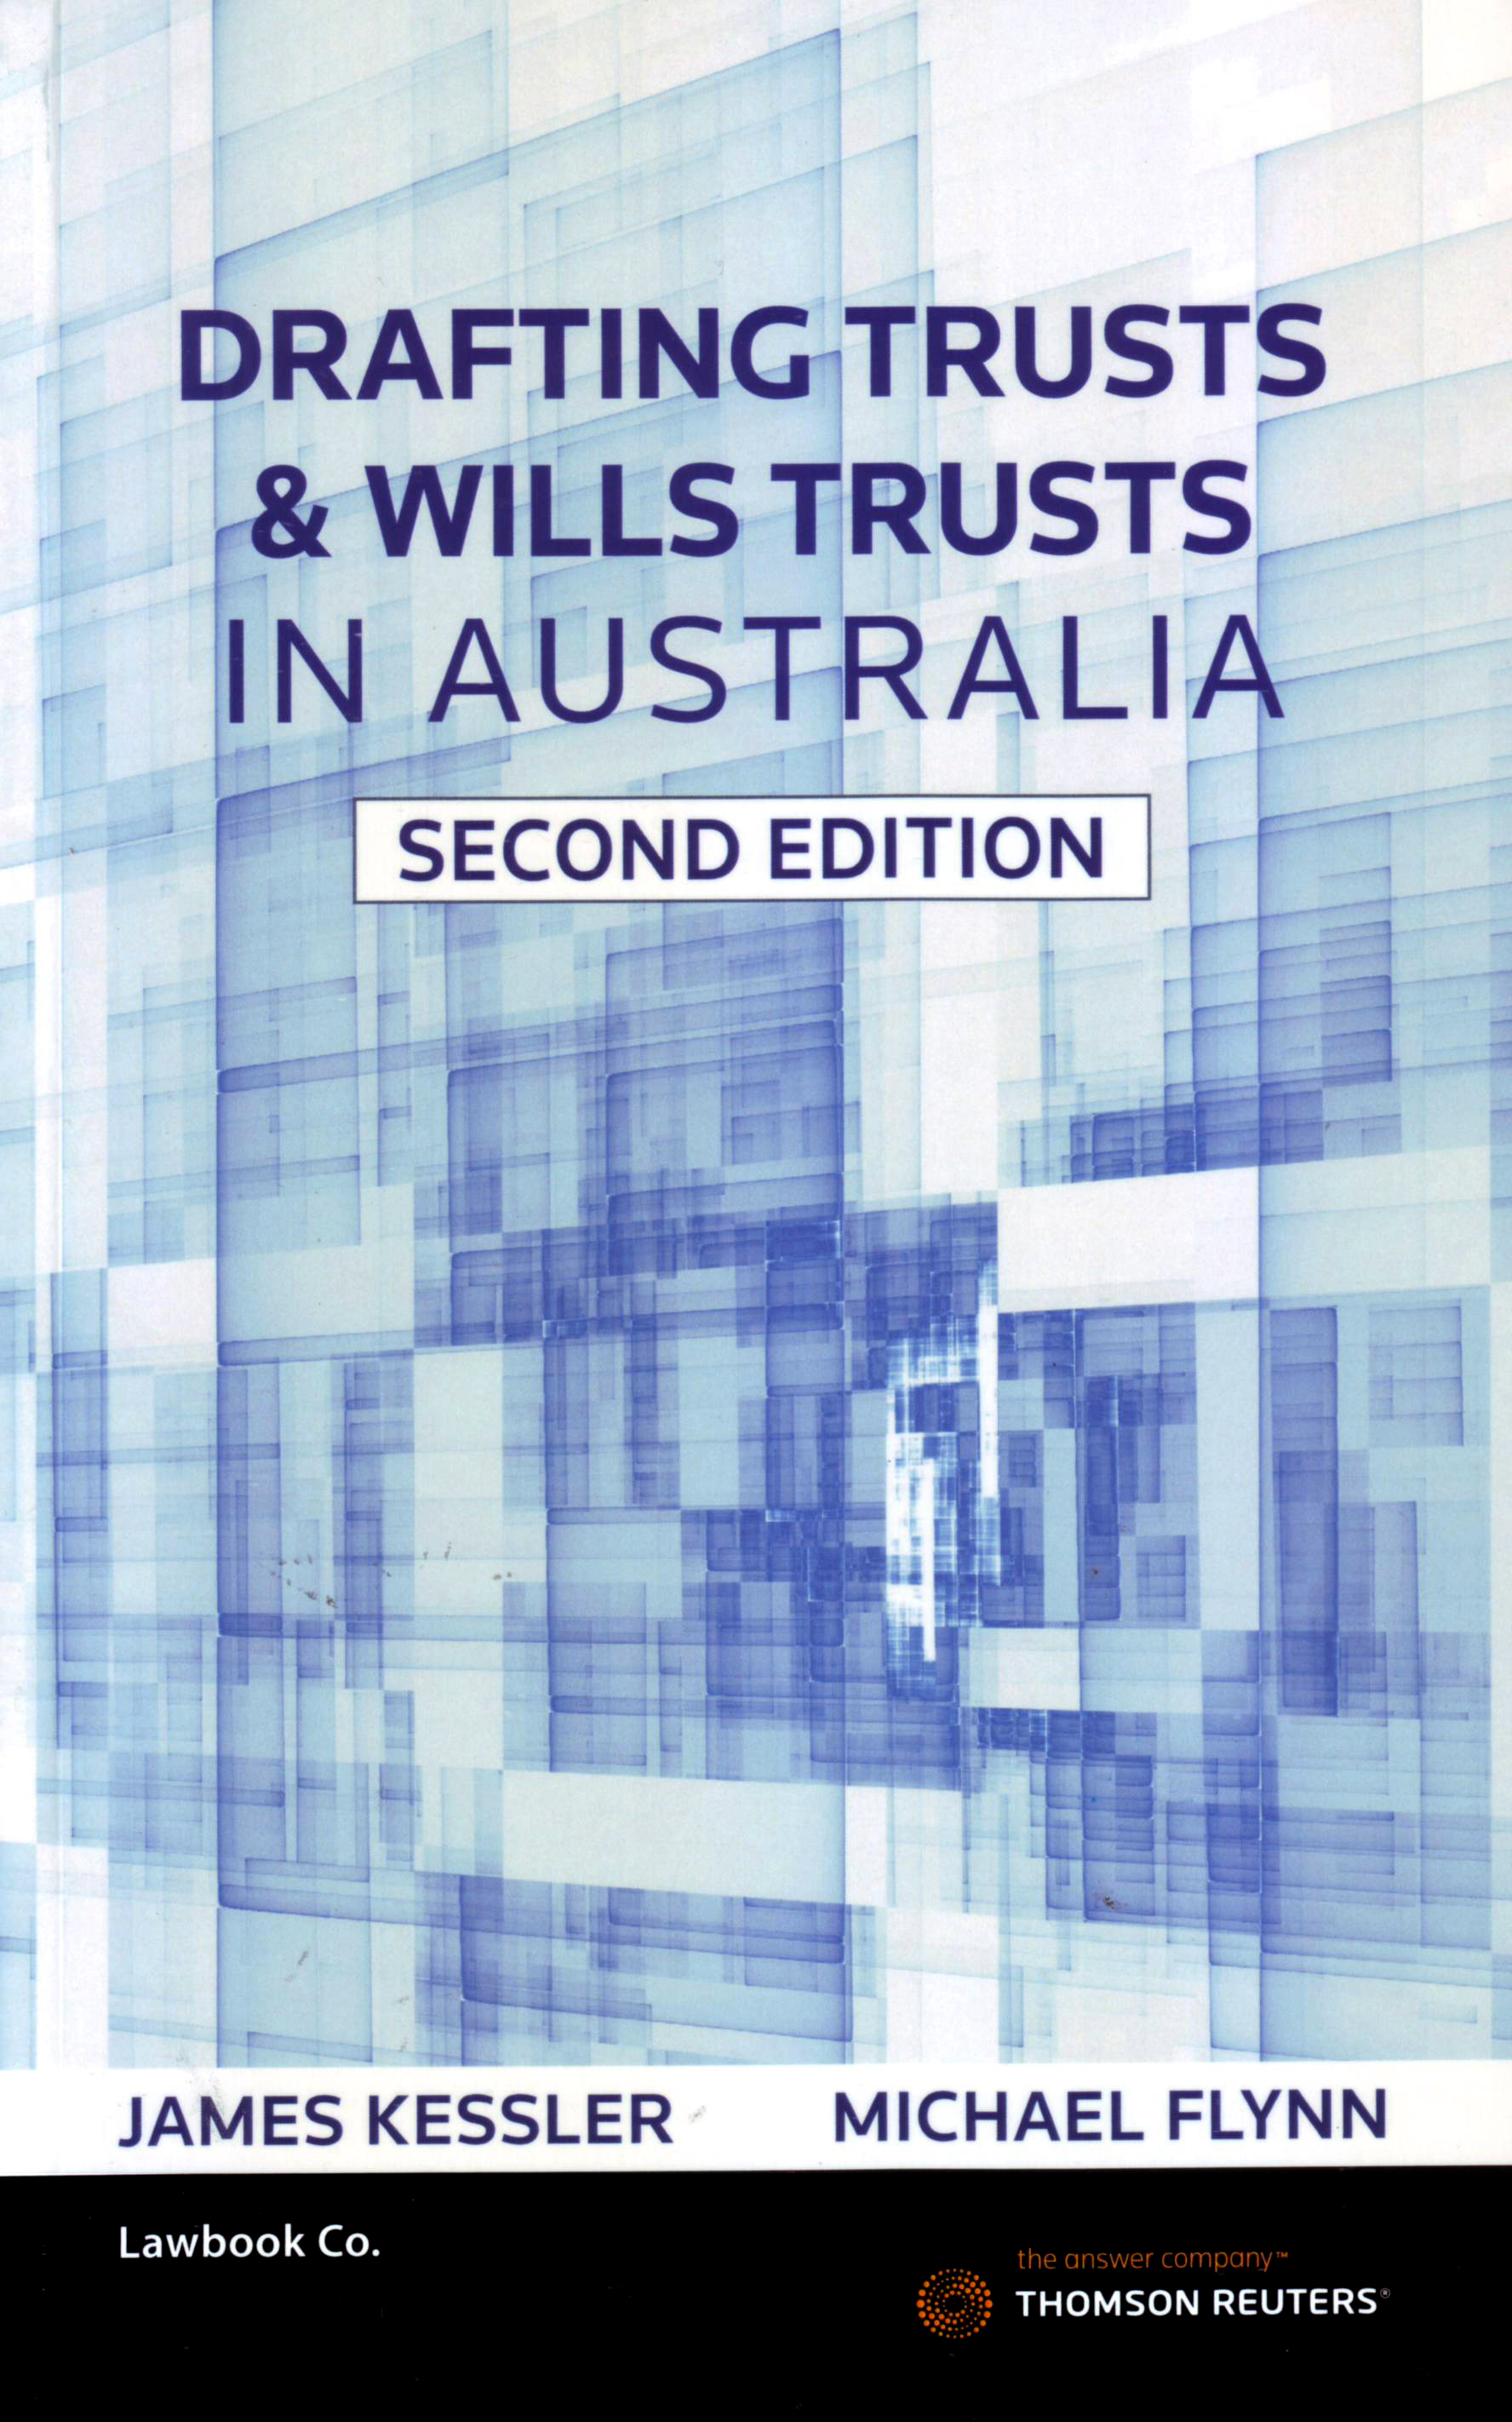 Drafting Trusts And Will Trusts In Australia e2